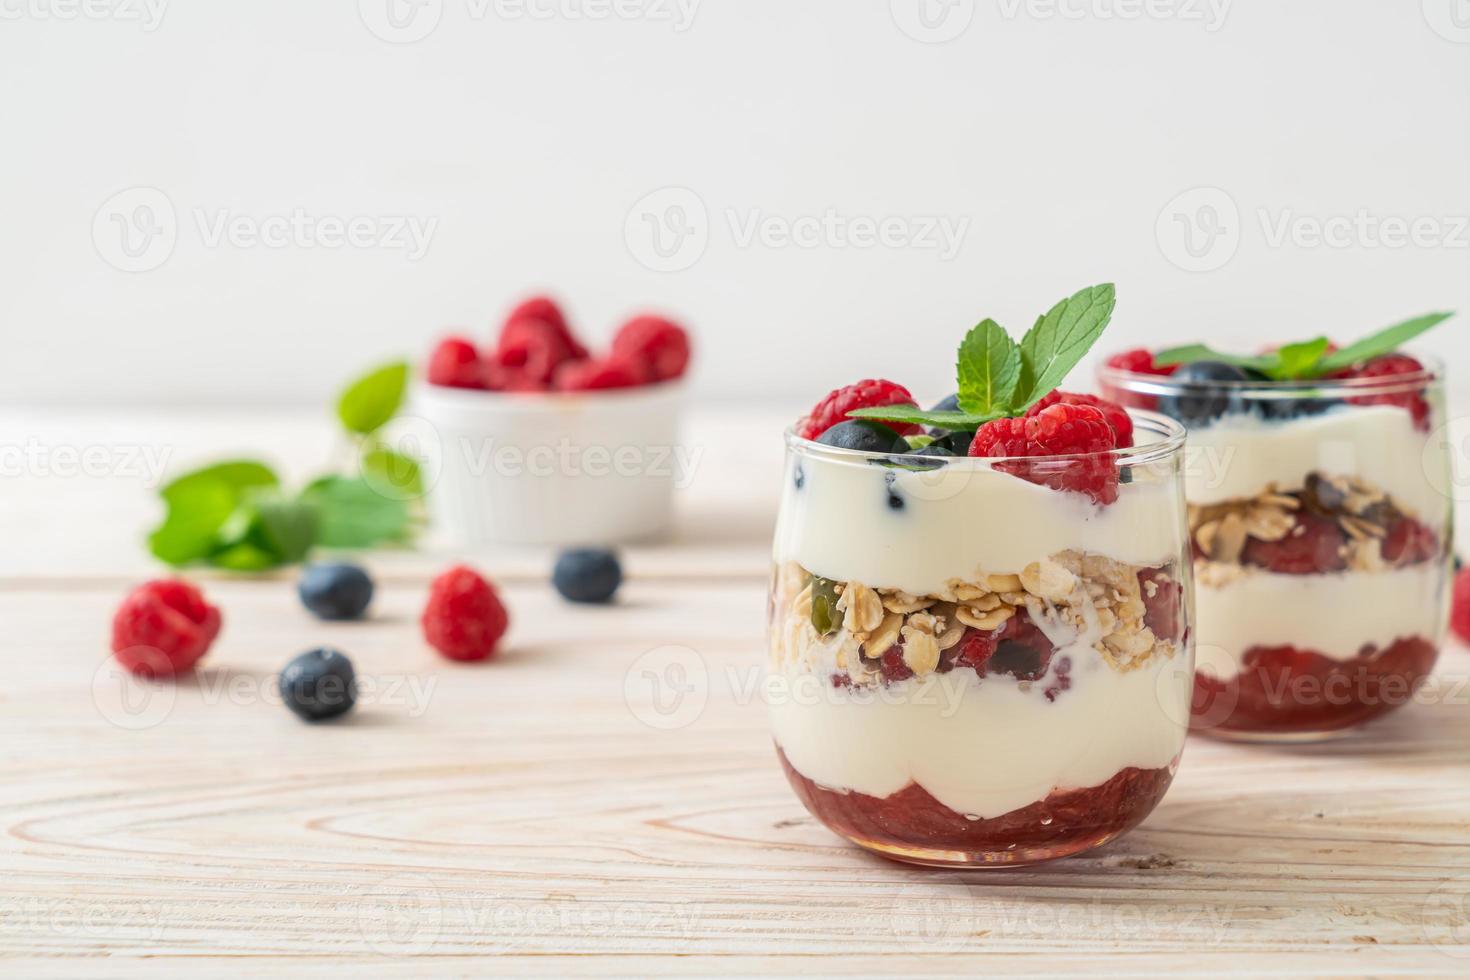 Homemade raspberry and blueberry with yogurt and granola - healthy food style photo